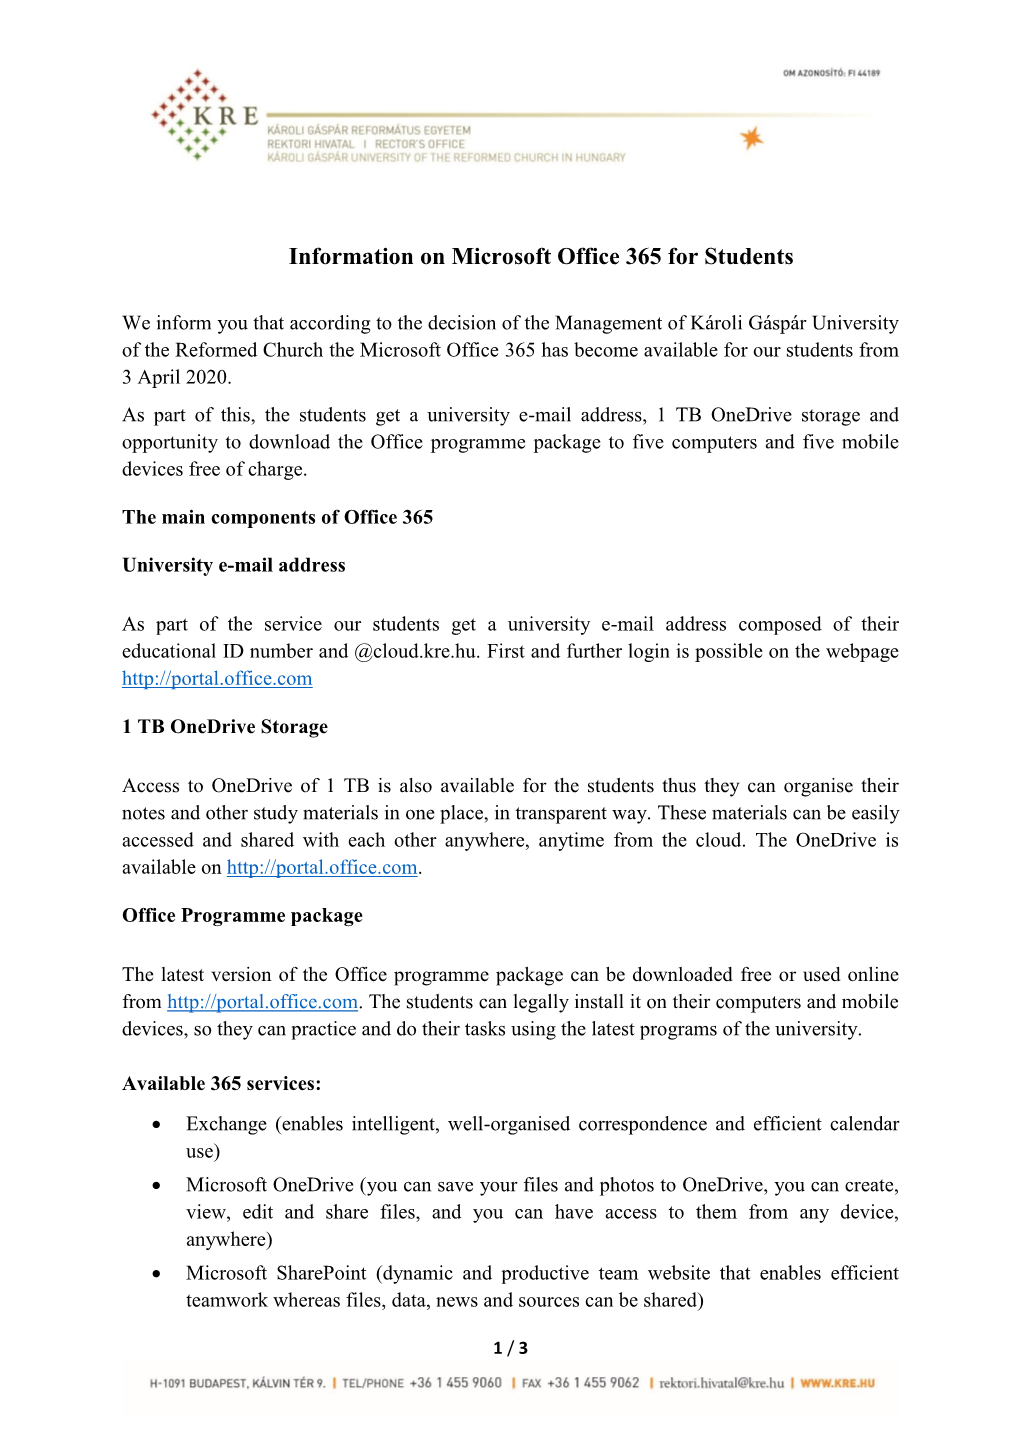 Information on Microsoft Office 365 for Students